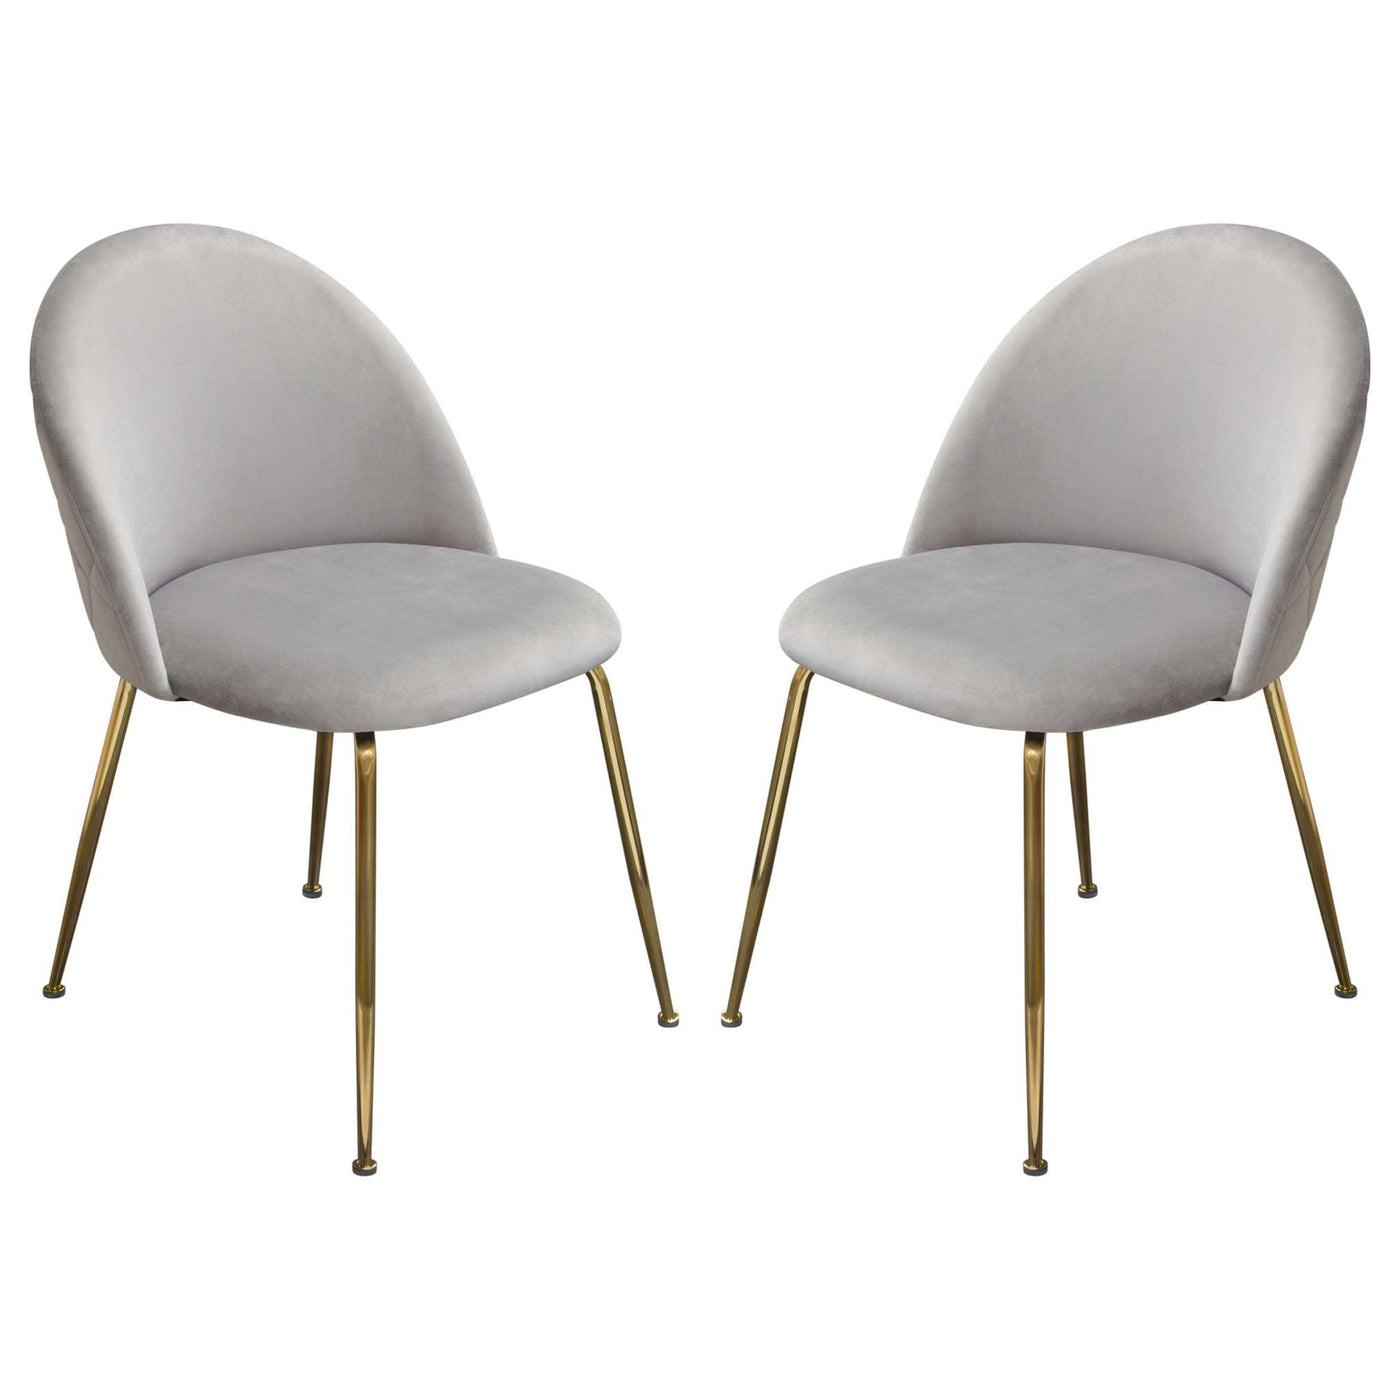 Lilly Set of (2) Chairs in Velvet w/ Brushed Gold Metal Legs by Diamond Sofa